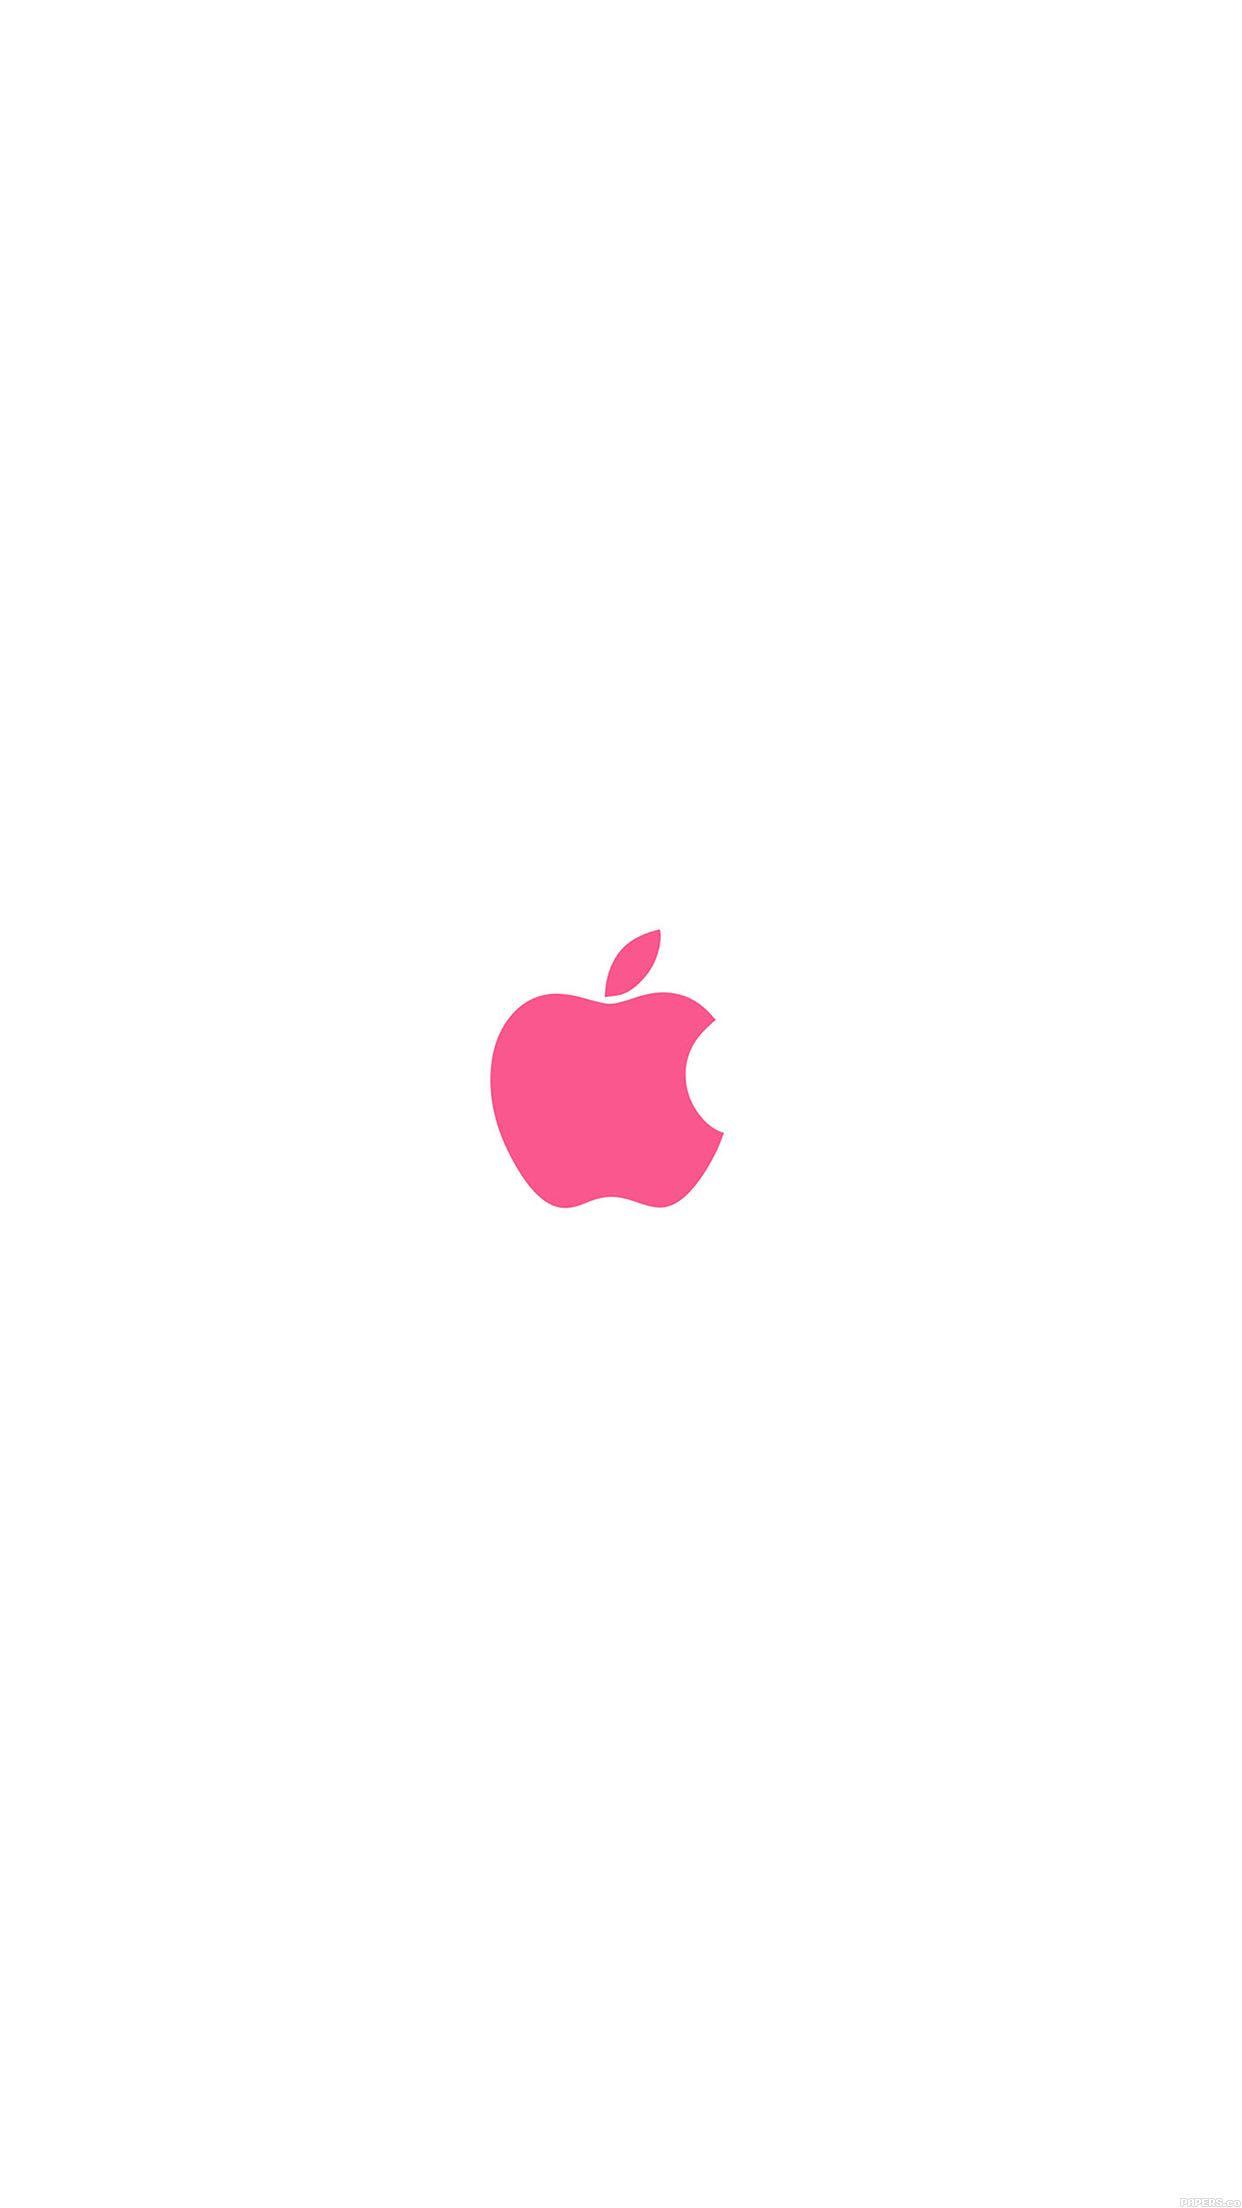 Red Apple Logo Wallpapers - Top Free Red Apple Logo Backgrounds ...